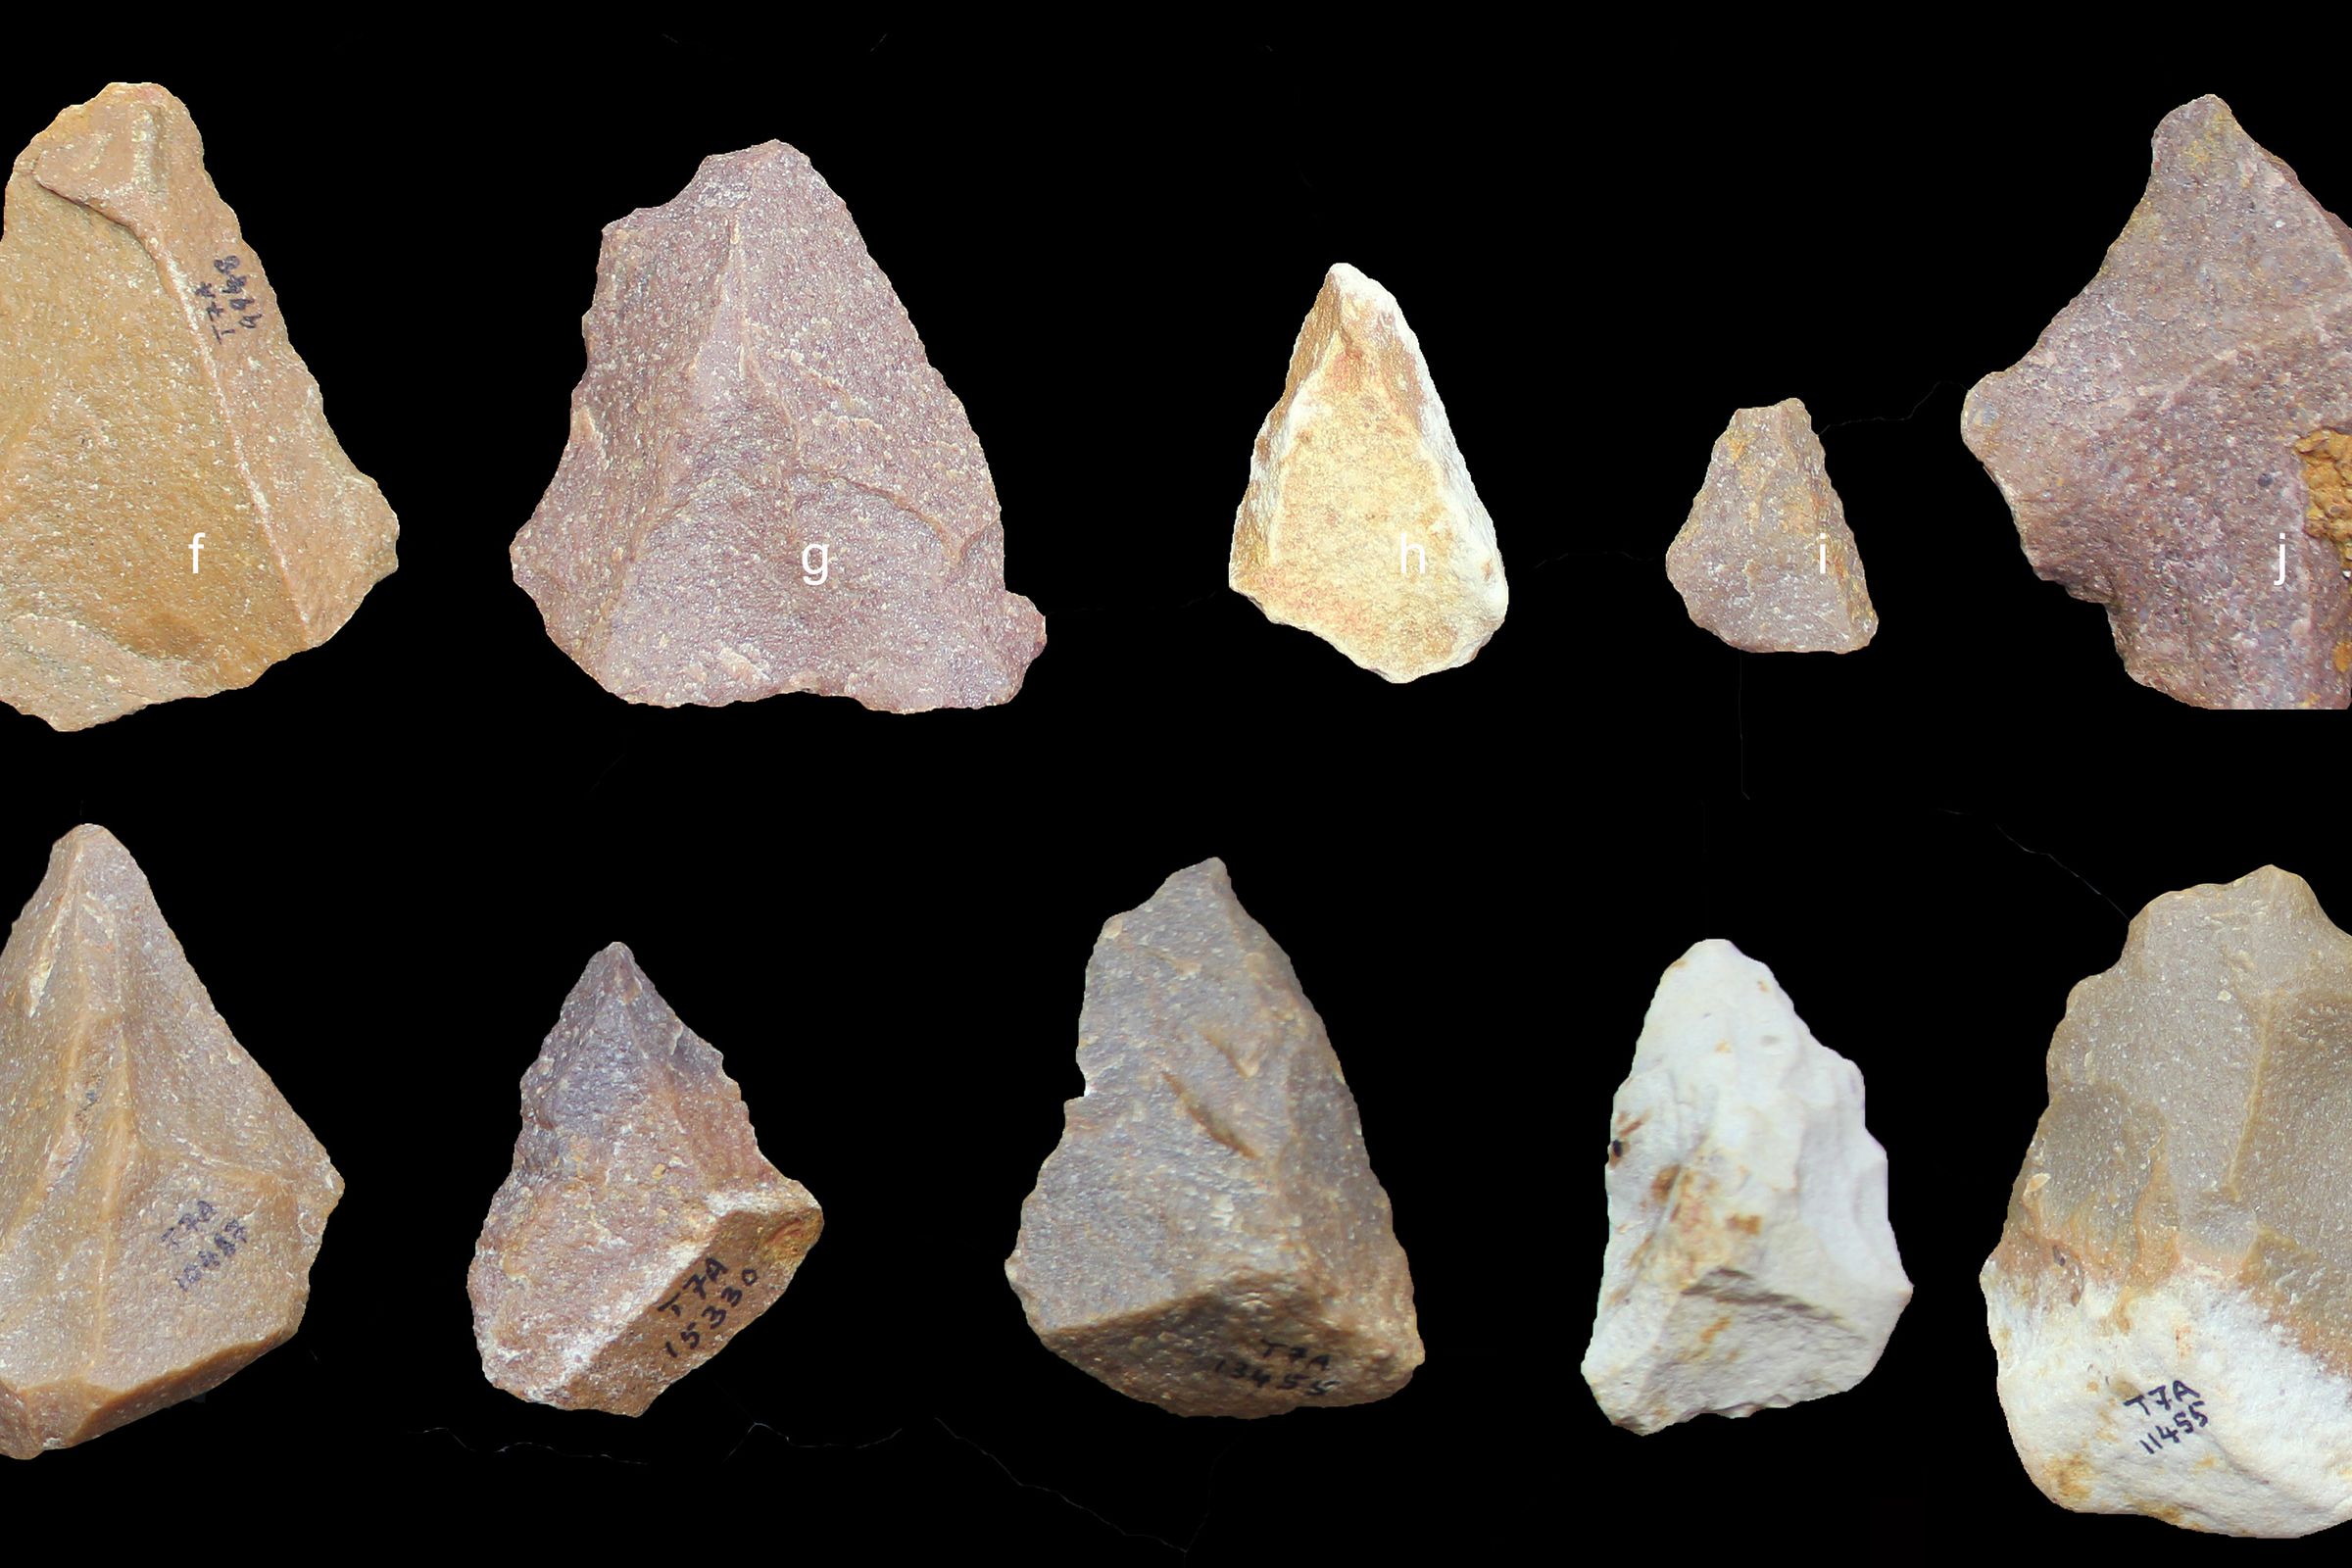 Stone tools recovered at the Attirampakkam site in India. 